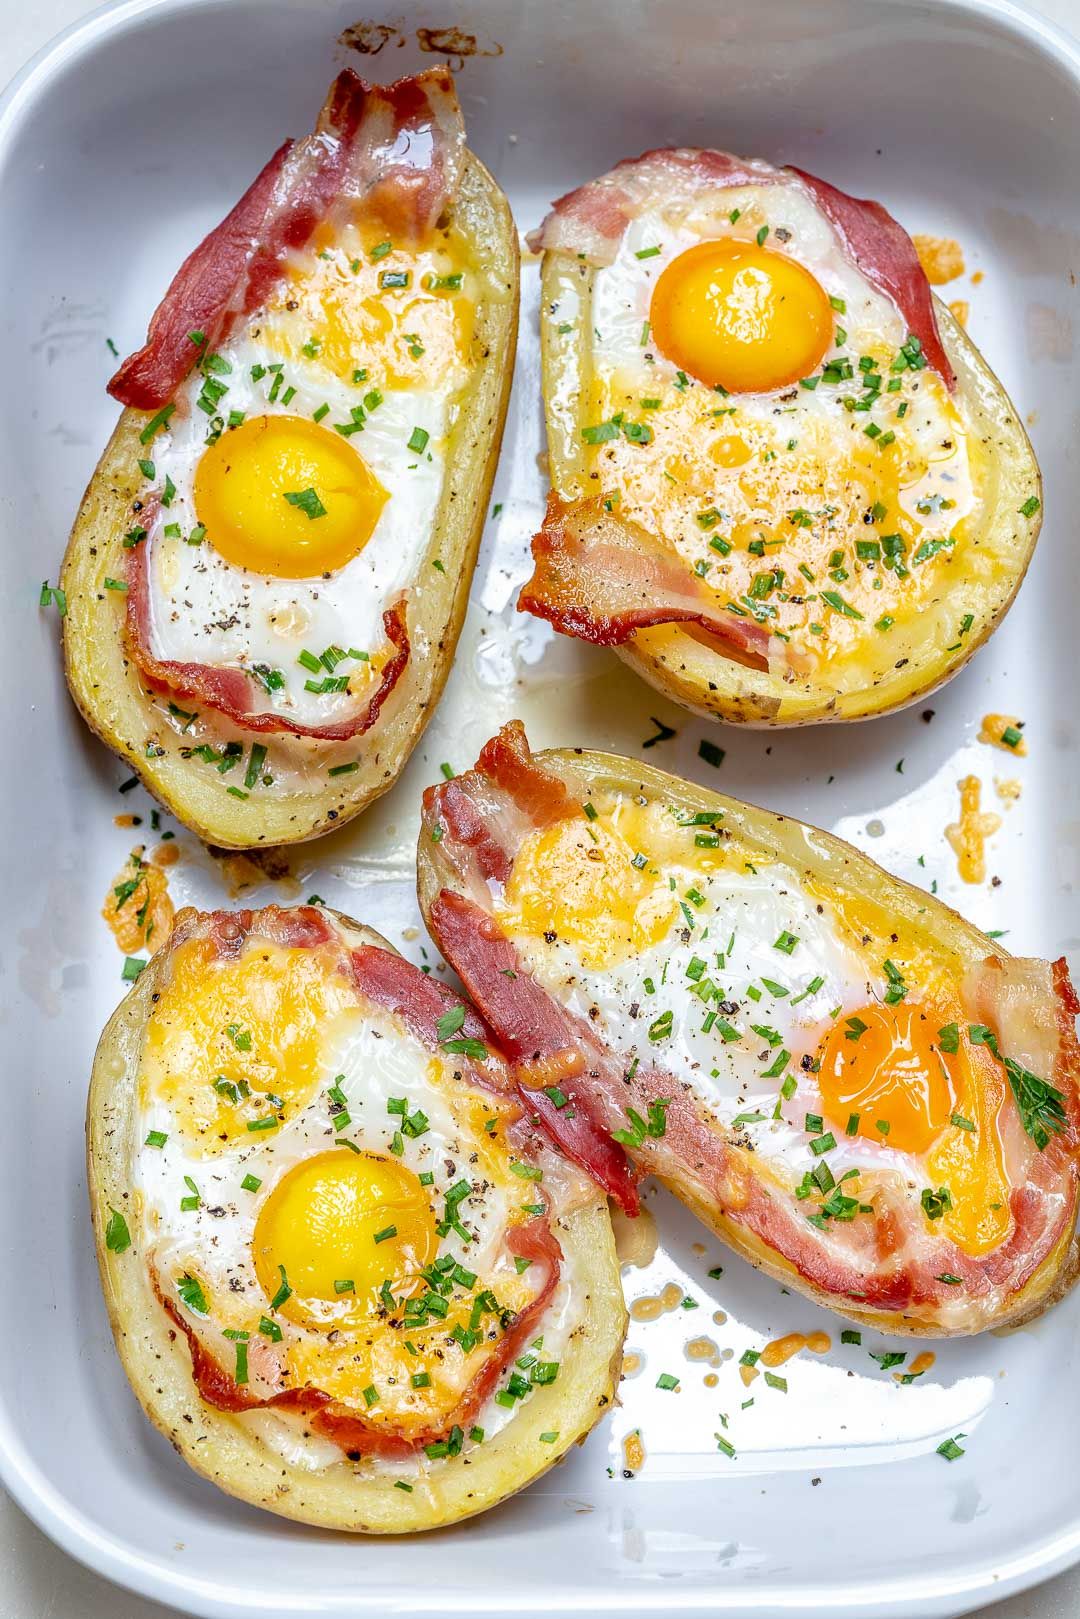 Double Baked Bacon + Egg Potatoes for Super Creative and Clean...